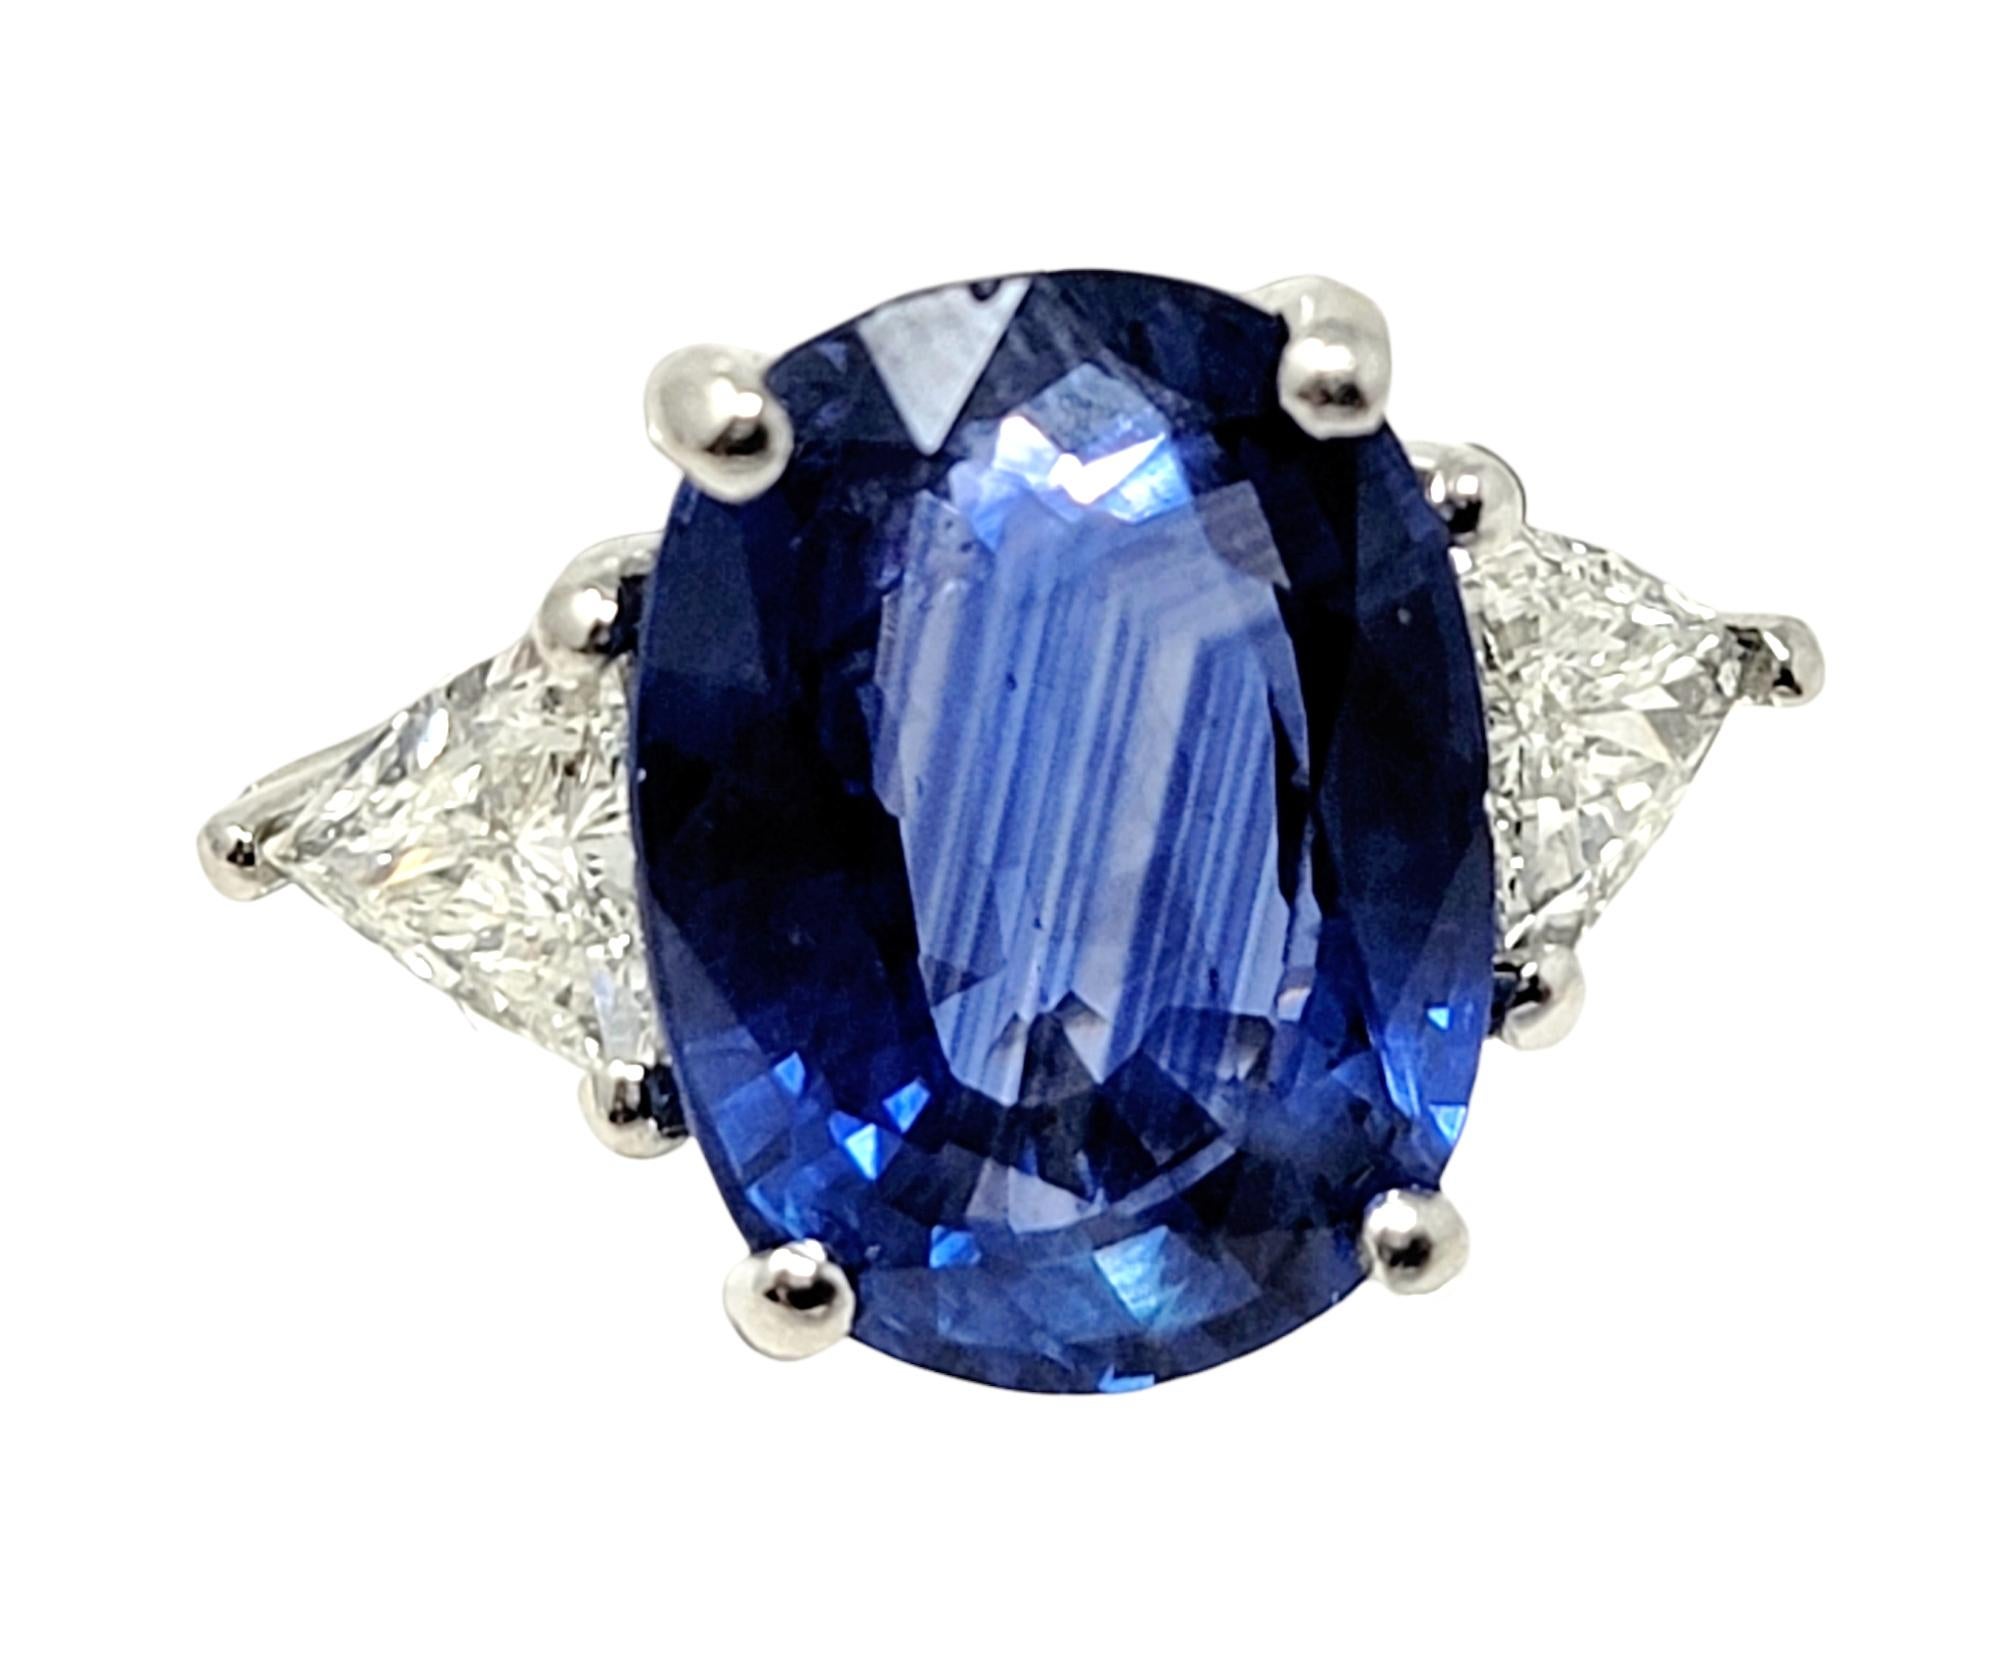 This incredible sapphire and diamond three-stone ring will absolutely take your breath away. This is a truly extraordinary piece with stunning fine details. The brilliant blue sapphire stone against the bright white natural diamonds really catches